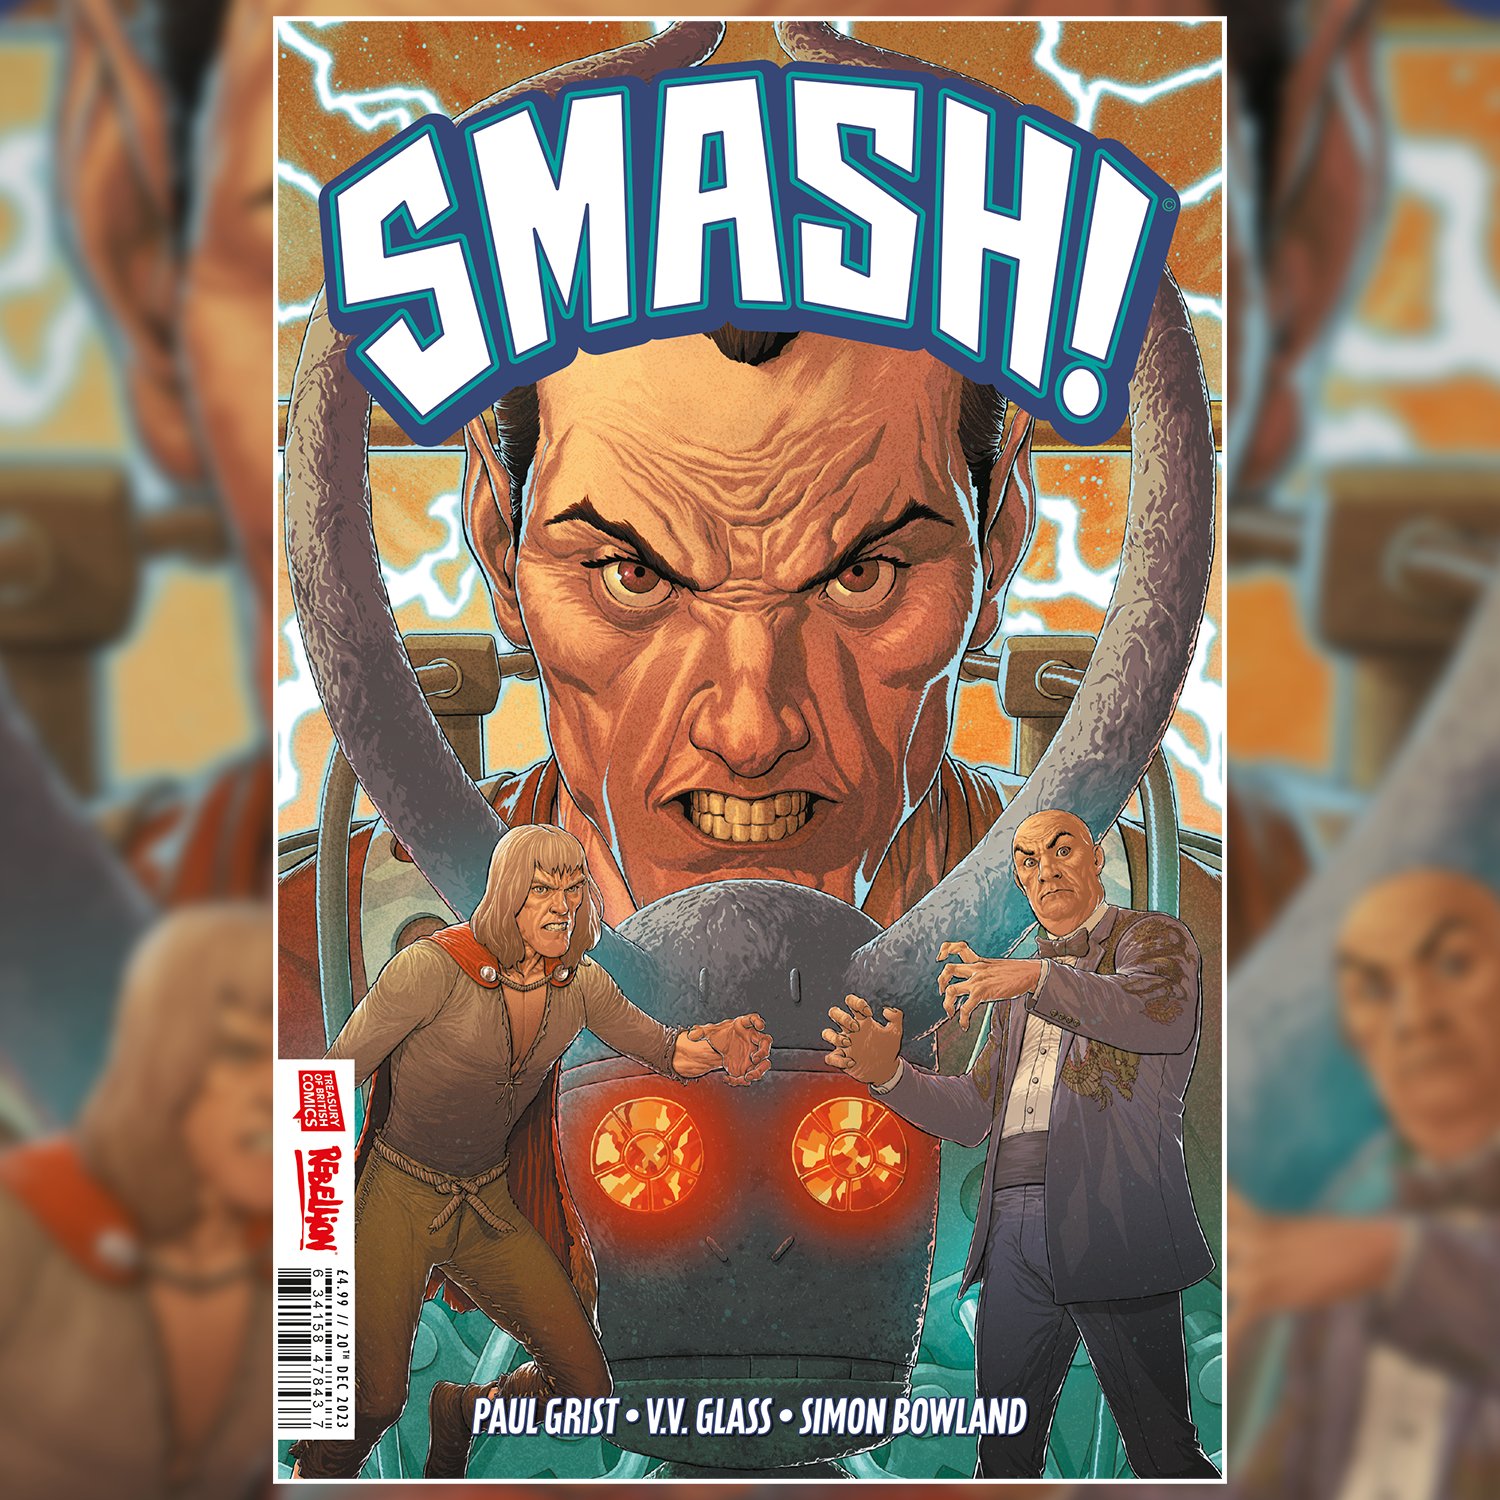 Out Now! The Spider takes on Cursitor Doom and Adam Eterno in the final issue of Smash!